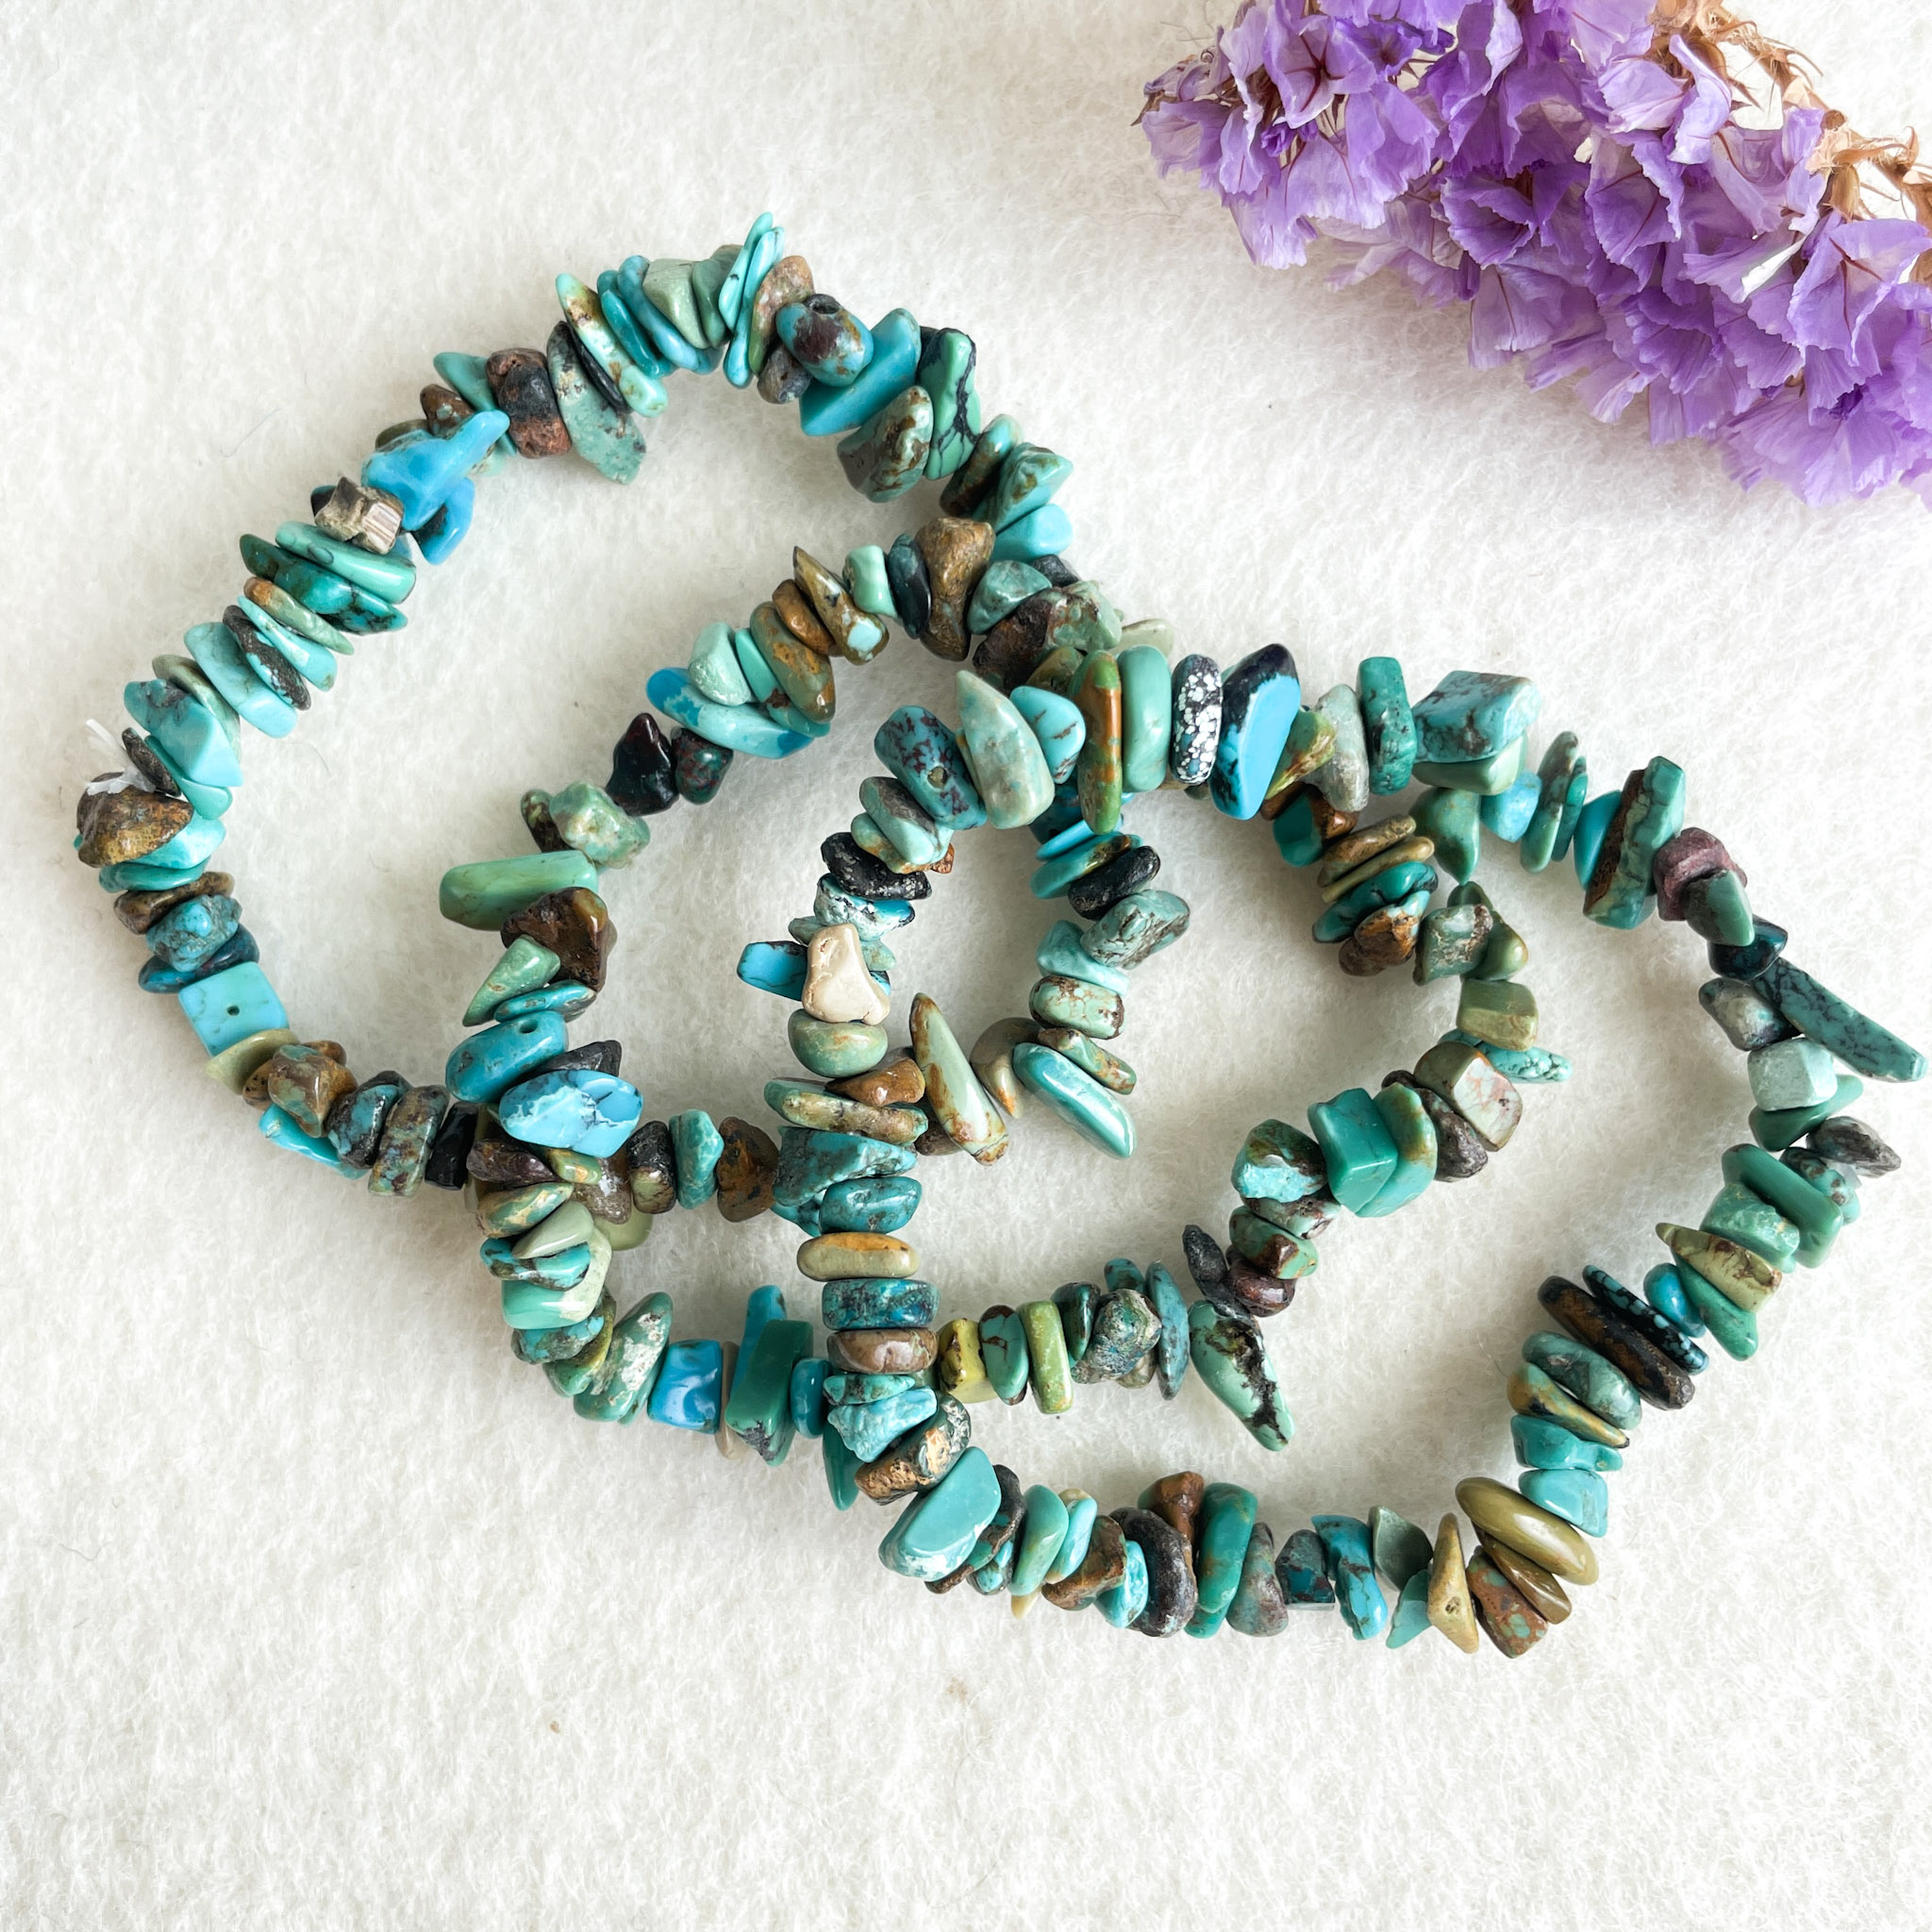 A string of turquoise beads in various shapes and sizes displayed in a spiral with a cluster of dried purple flowers in the top corner, all against a textured white background.